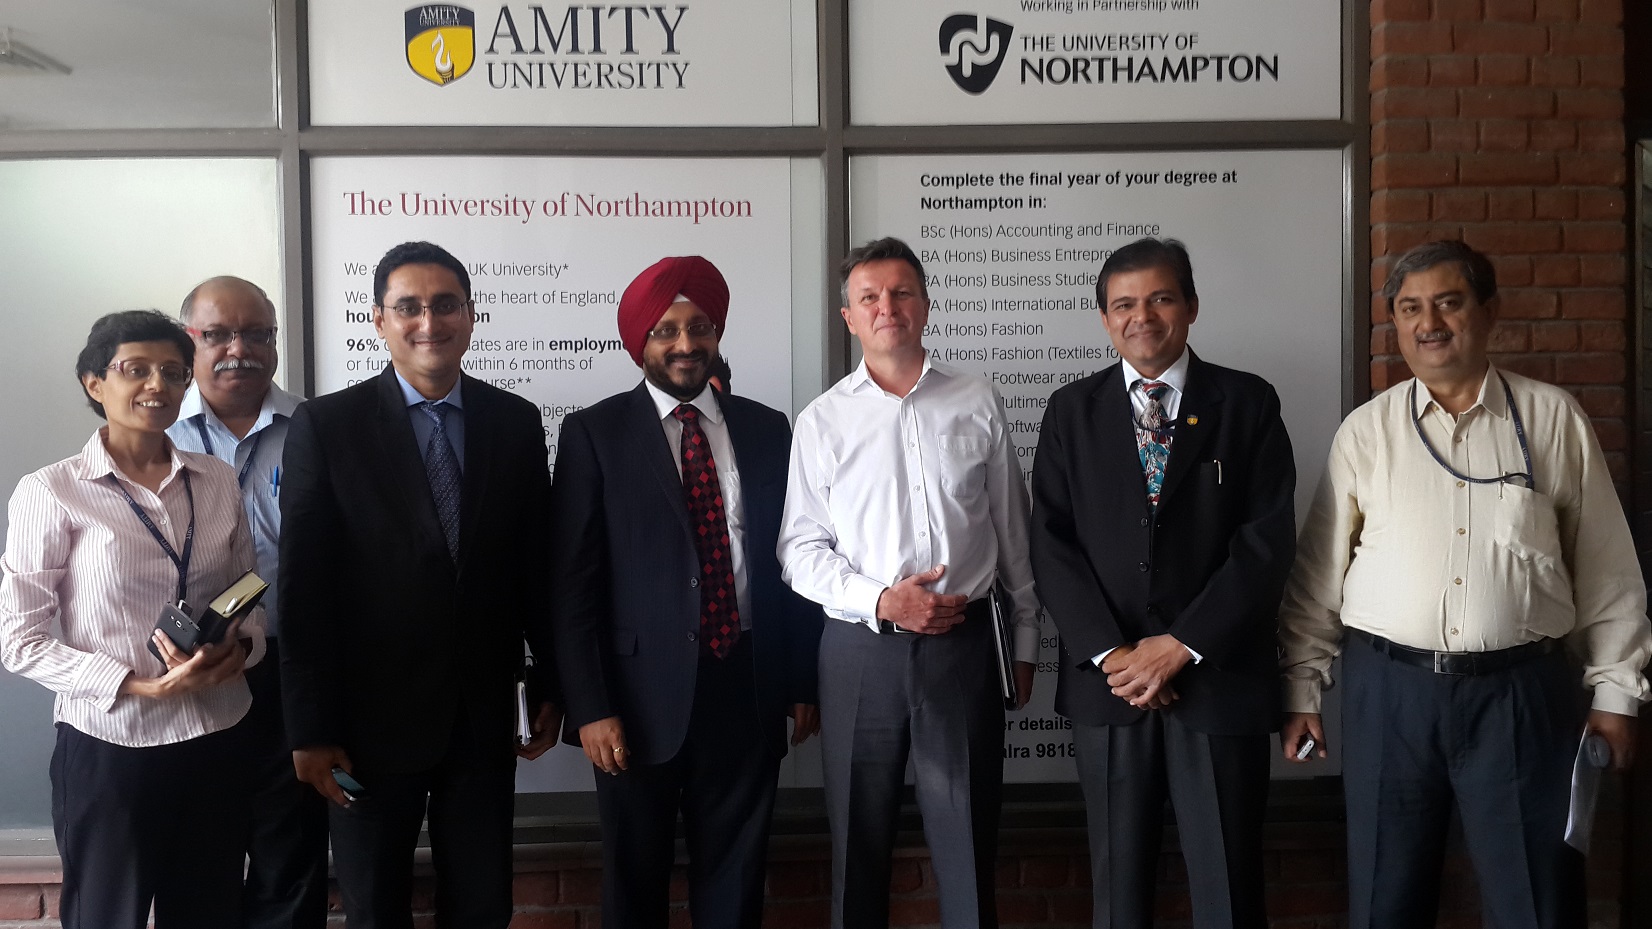 Amity University staff in their new office